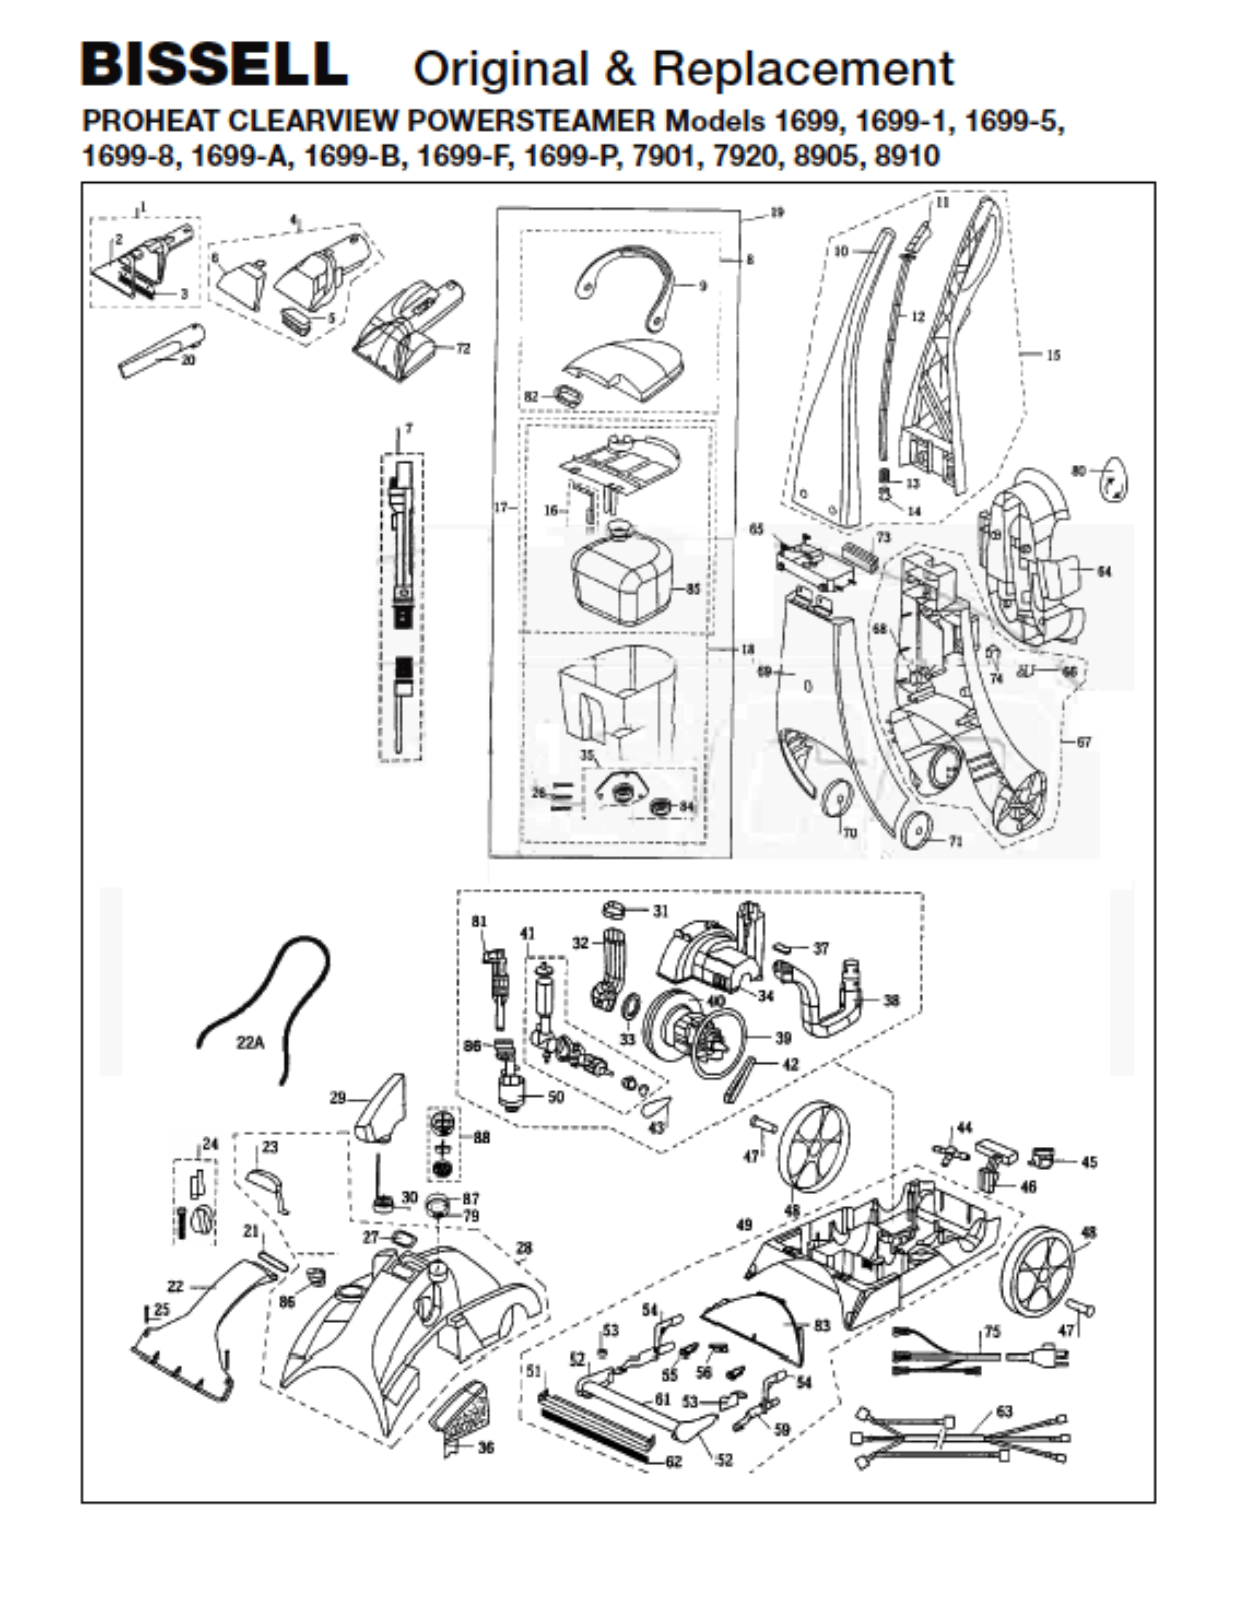 Bissell 7901-1 Owner's Manual